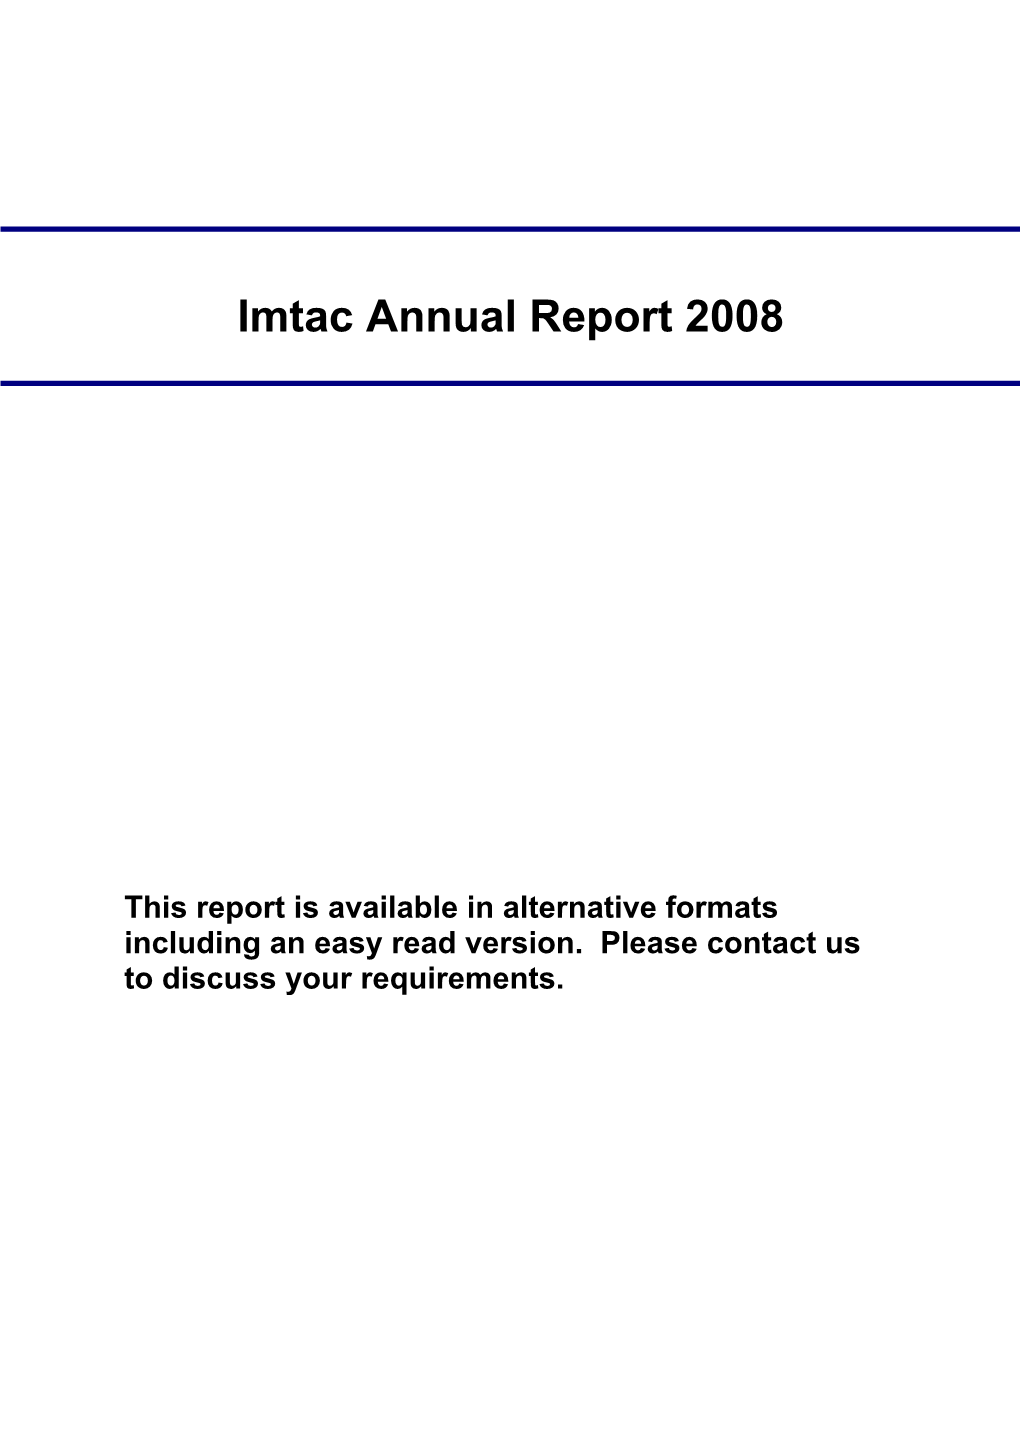 Imtac Annual Report 2008